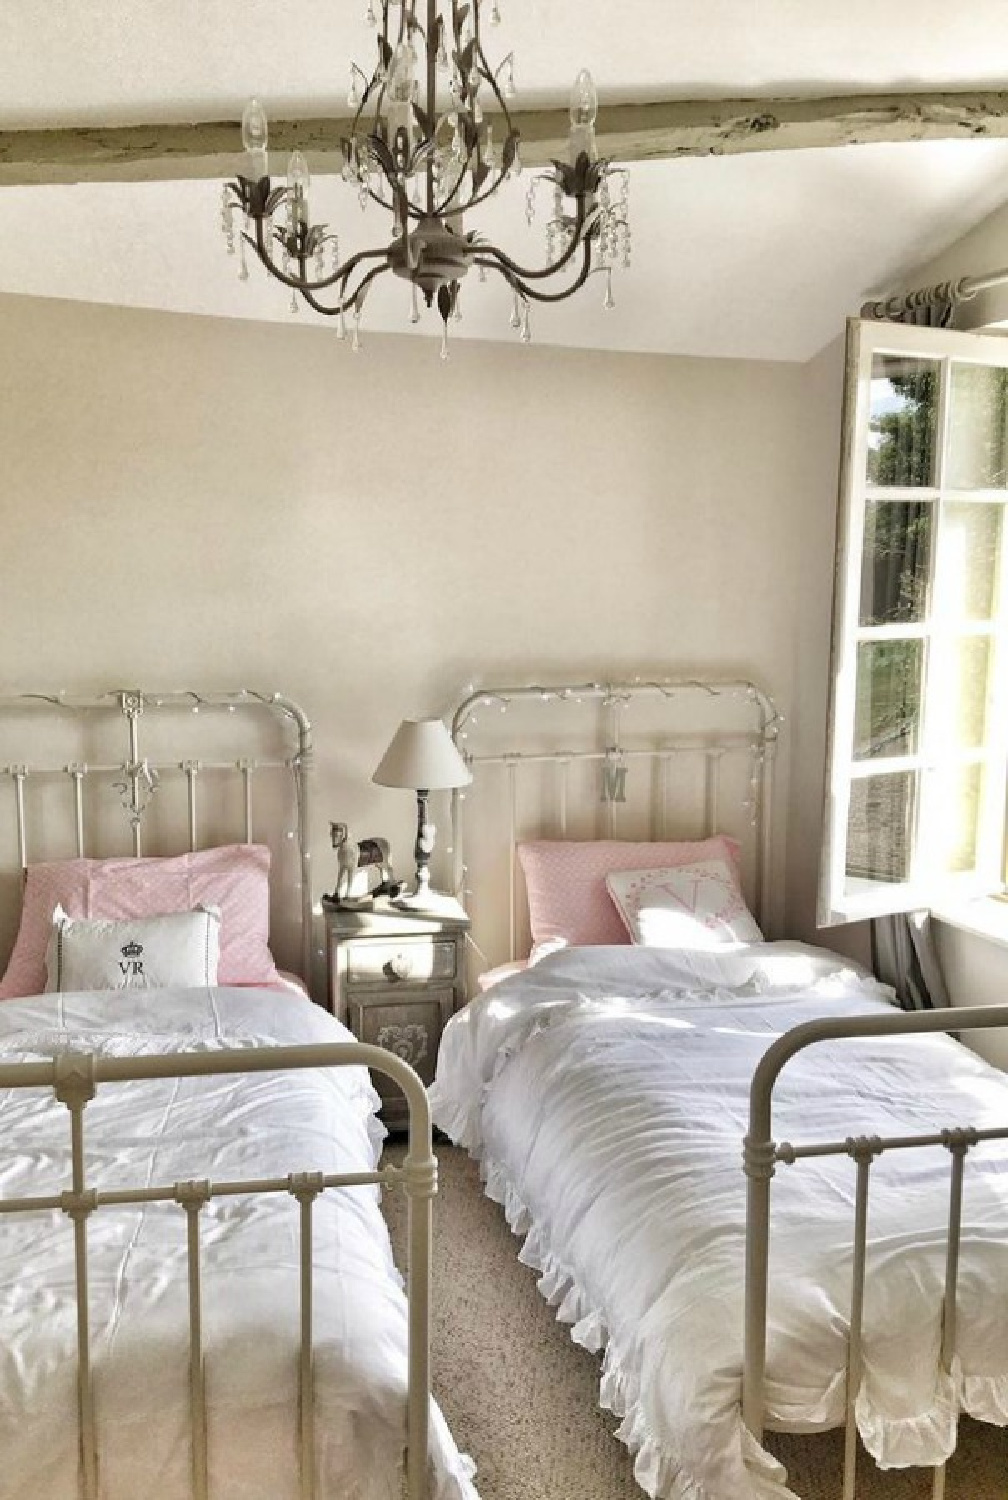 Within a thoughtfully renovated authentic French farmhouse near Bordeaux, Charlotte Reiss of Vivi et Margot has added authentic and romantic decor from France to create a timeless home with European country charm.